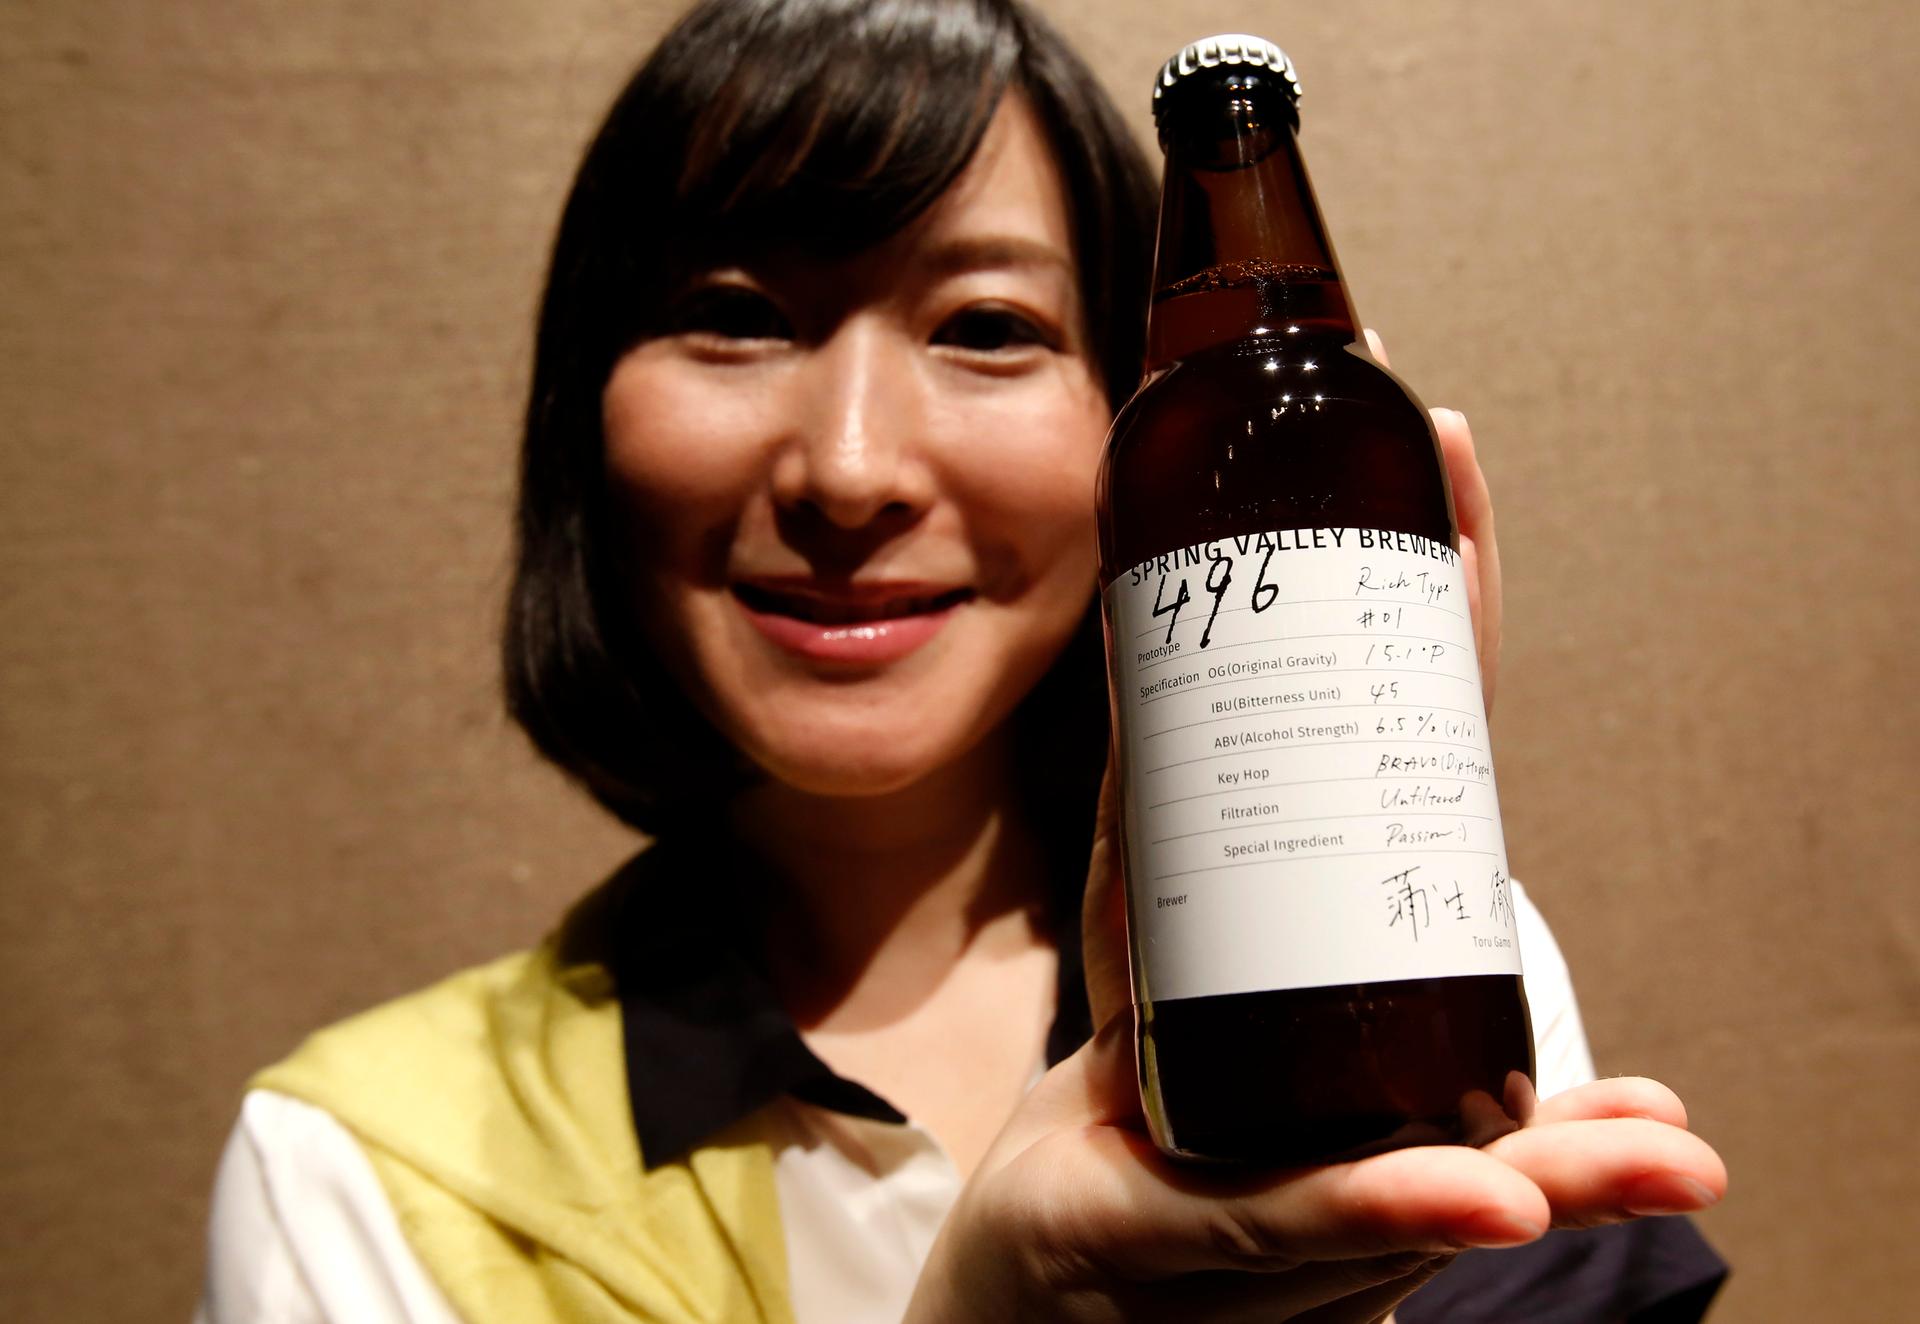 A Kirin staff member poses with its new craft beer product "Spring Valley Brewery 496 prototype," which was launched in July 2014. Craft styles are increasingly migrating from the United States to other countries.